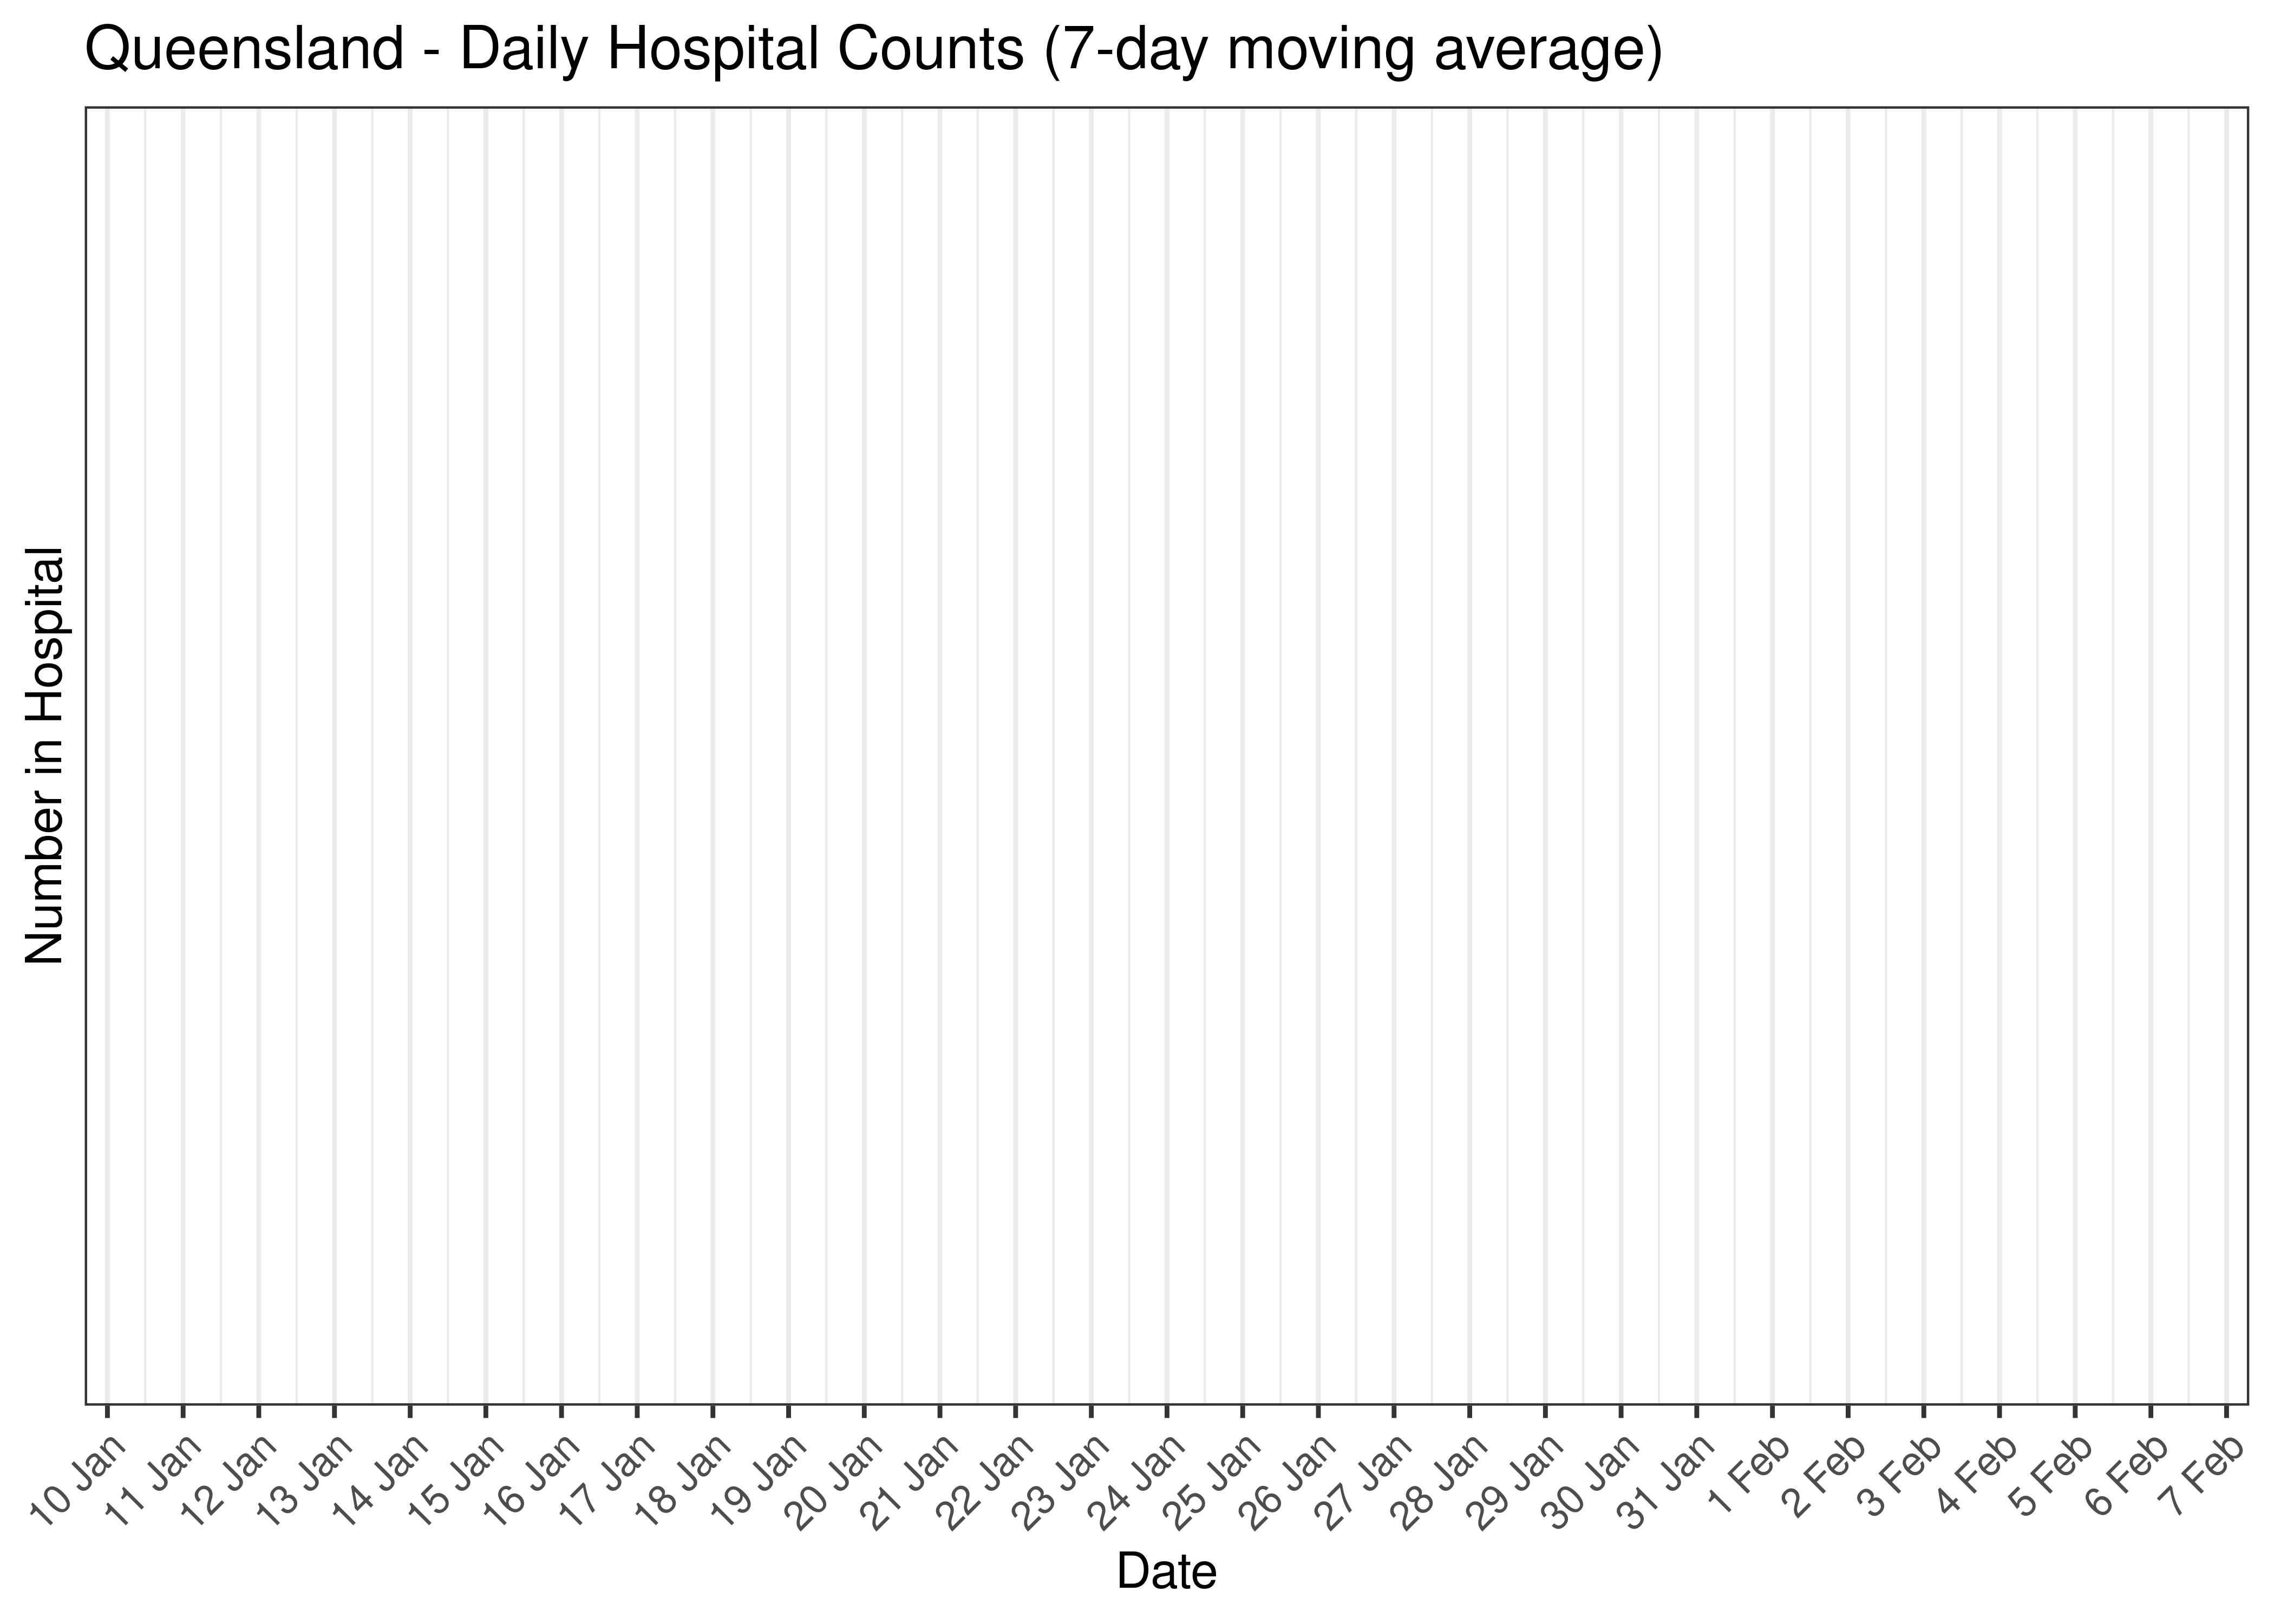 Queensland - Daily Hospital Counts for Last 30-days (7-day moving average)